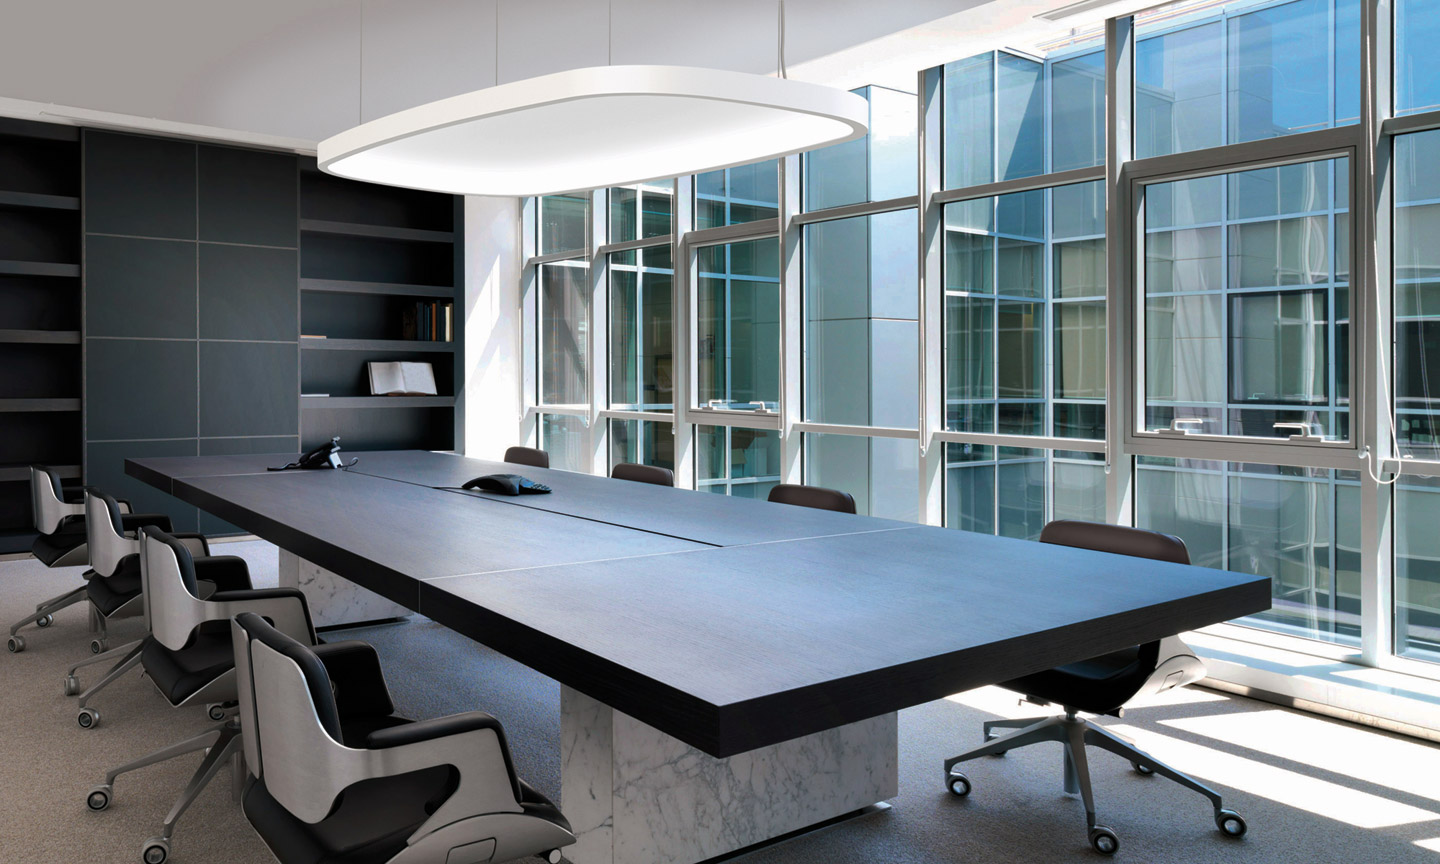 SOFT SQUARE LIGHT + ACOUSTIC meeting room